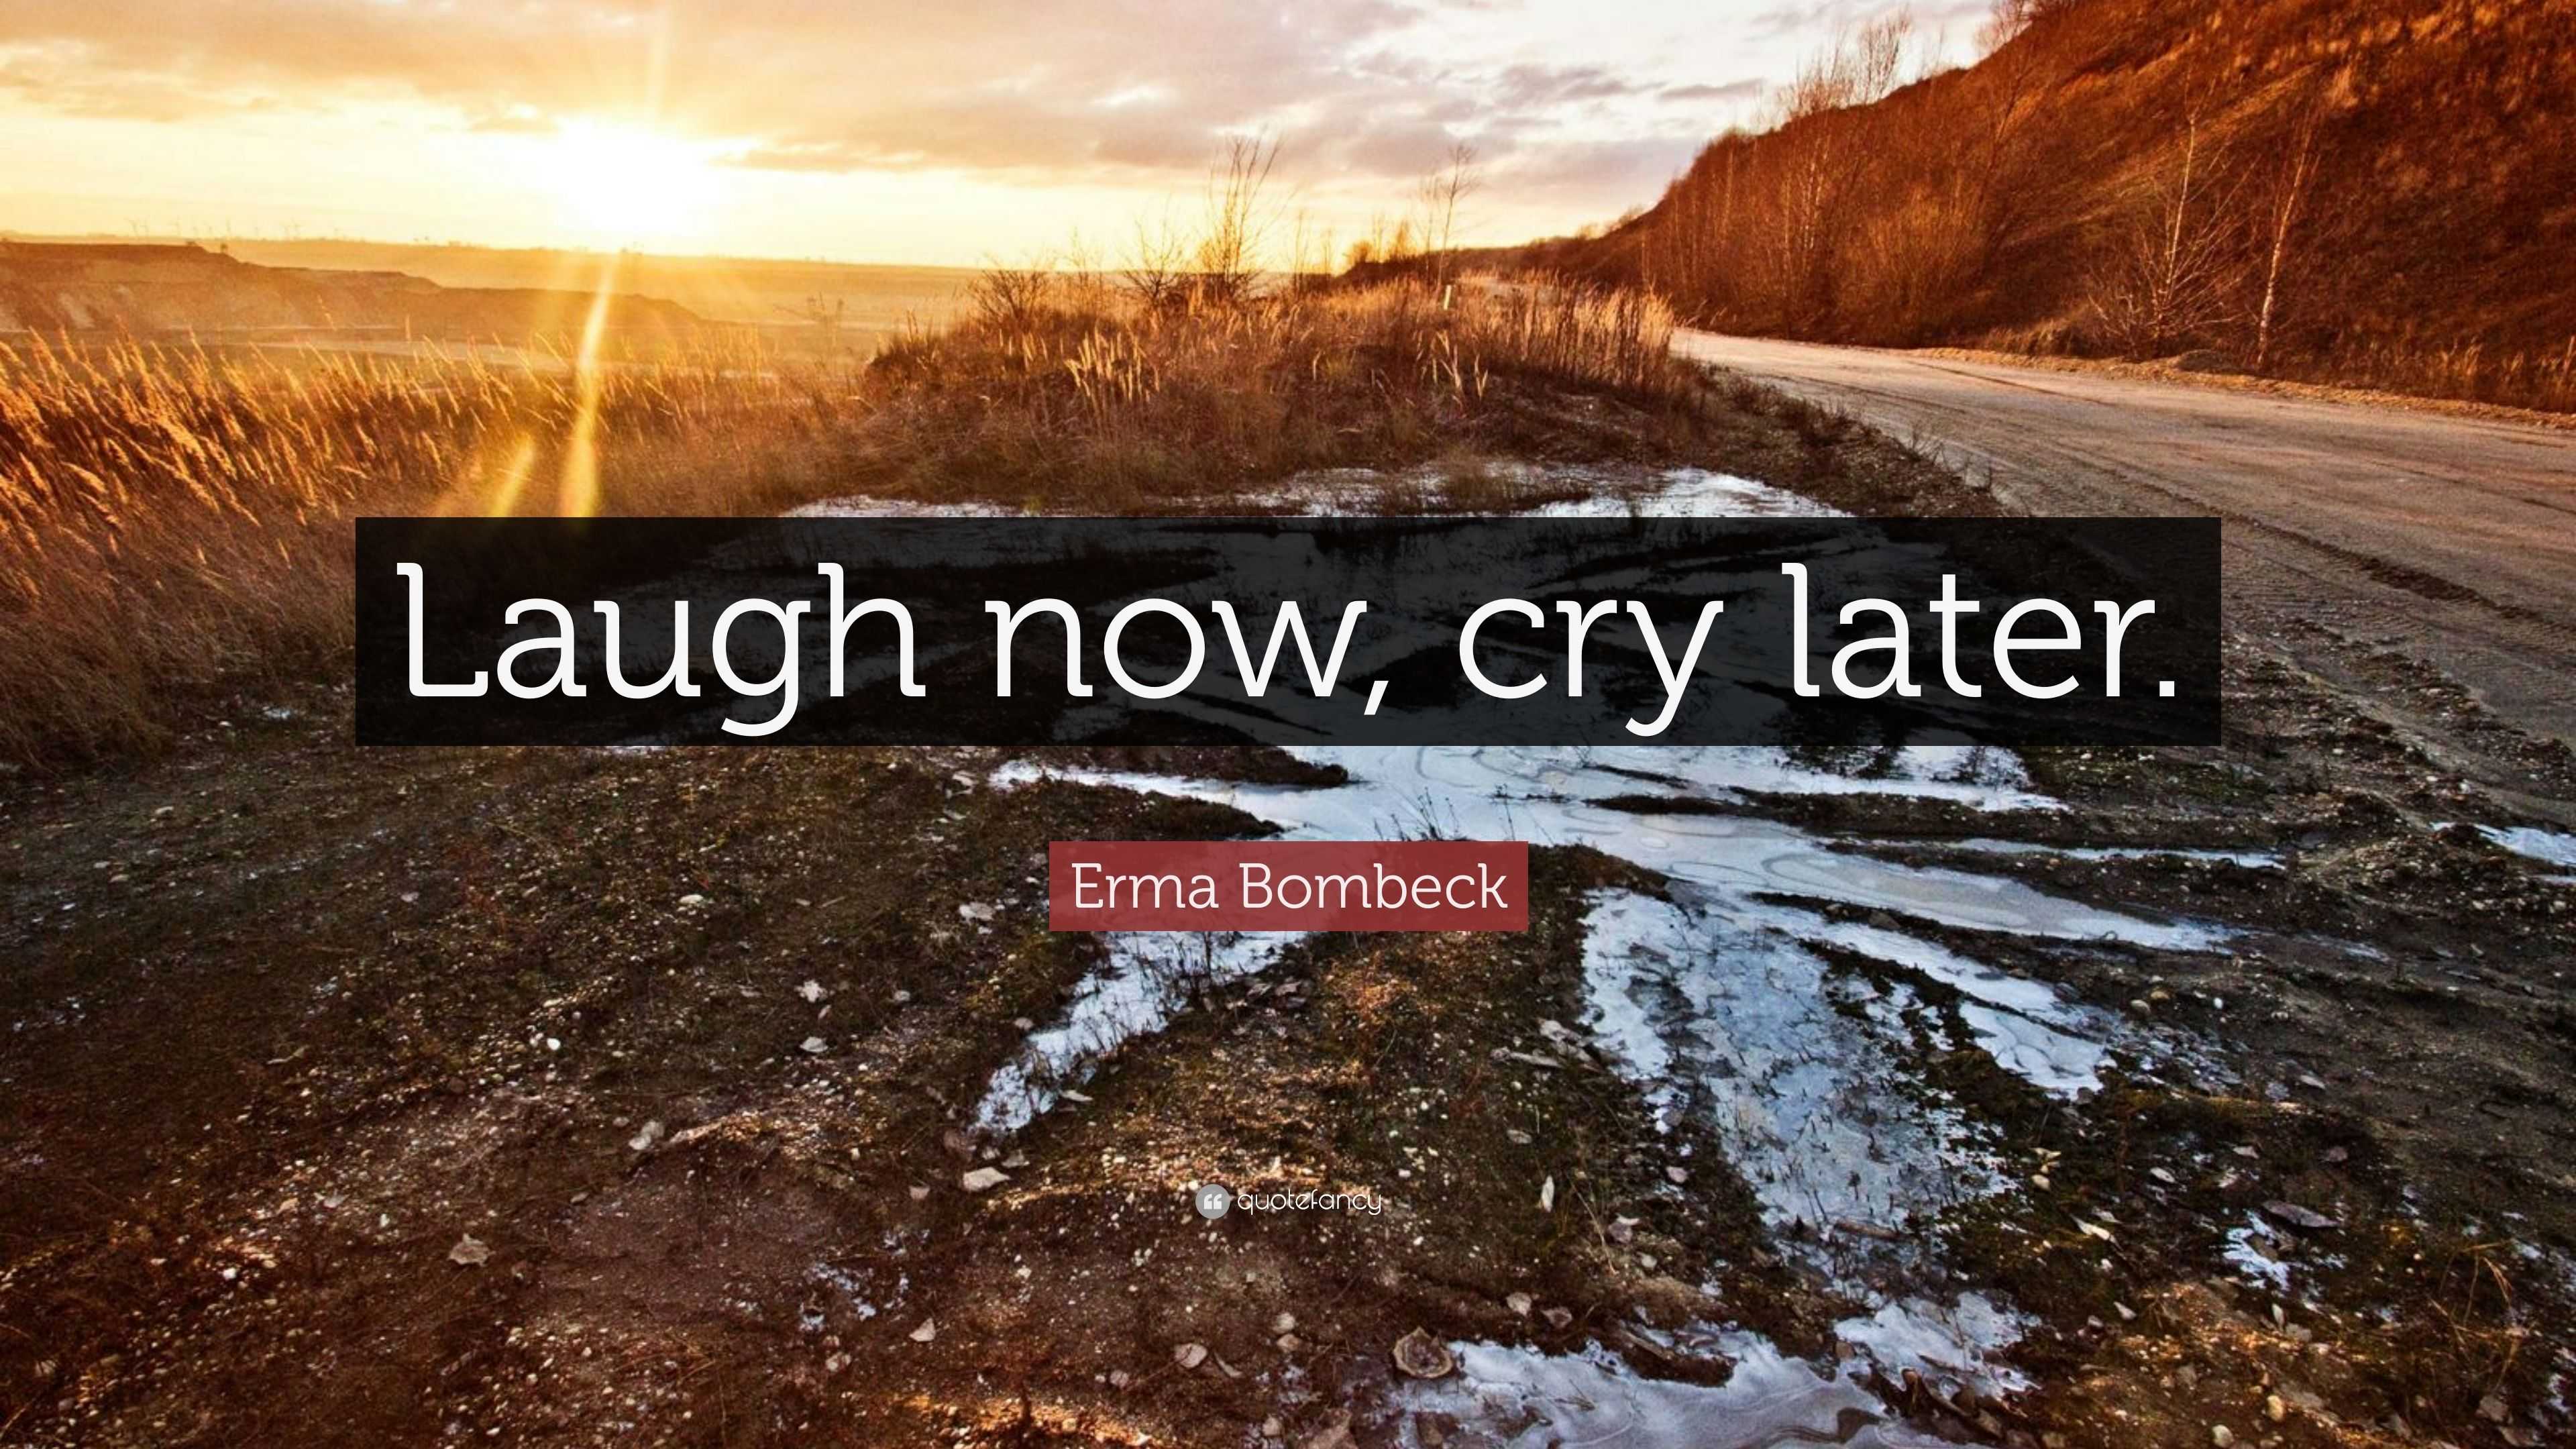 Erma Bombeck Quote: “Laugh now, cry later.”